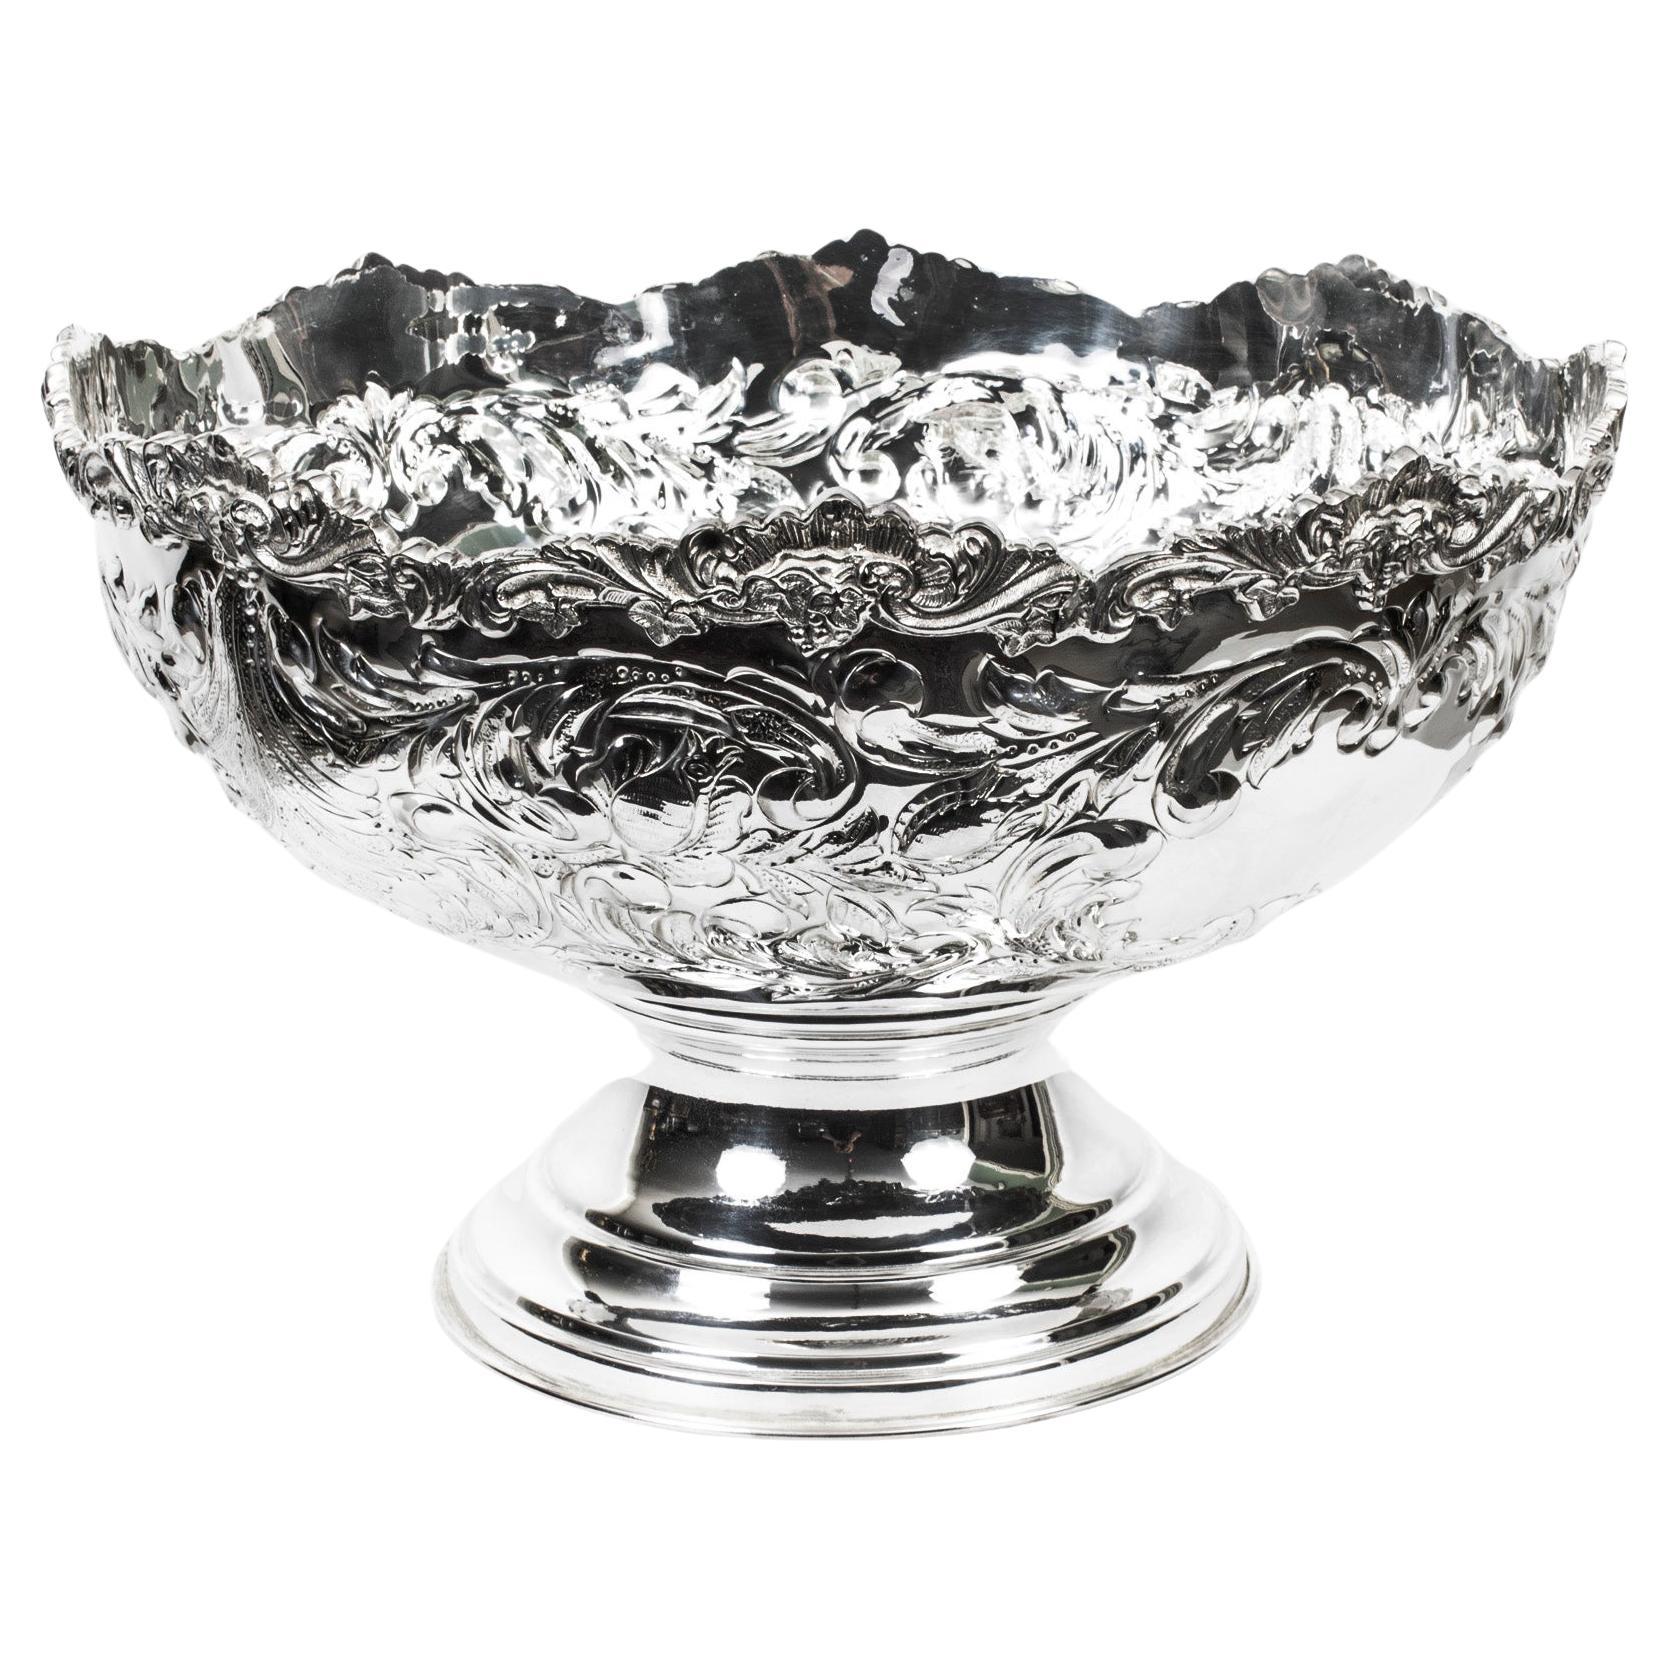 Are silver punch bowls worth anything?